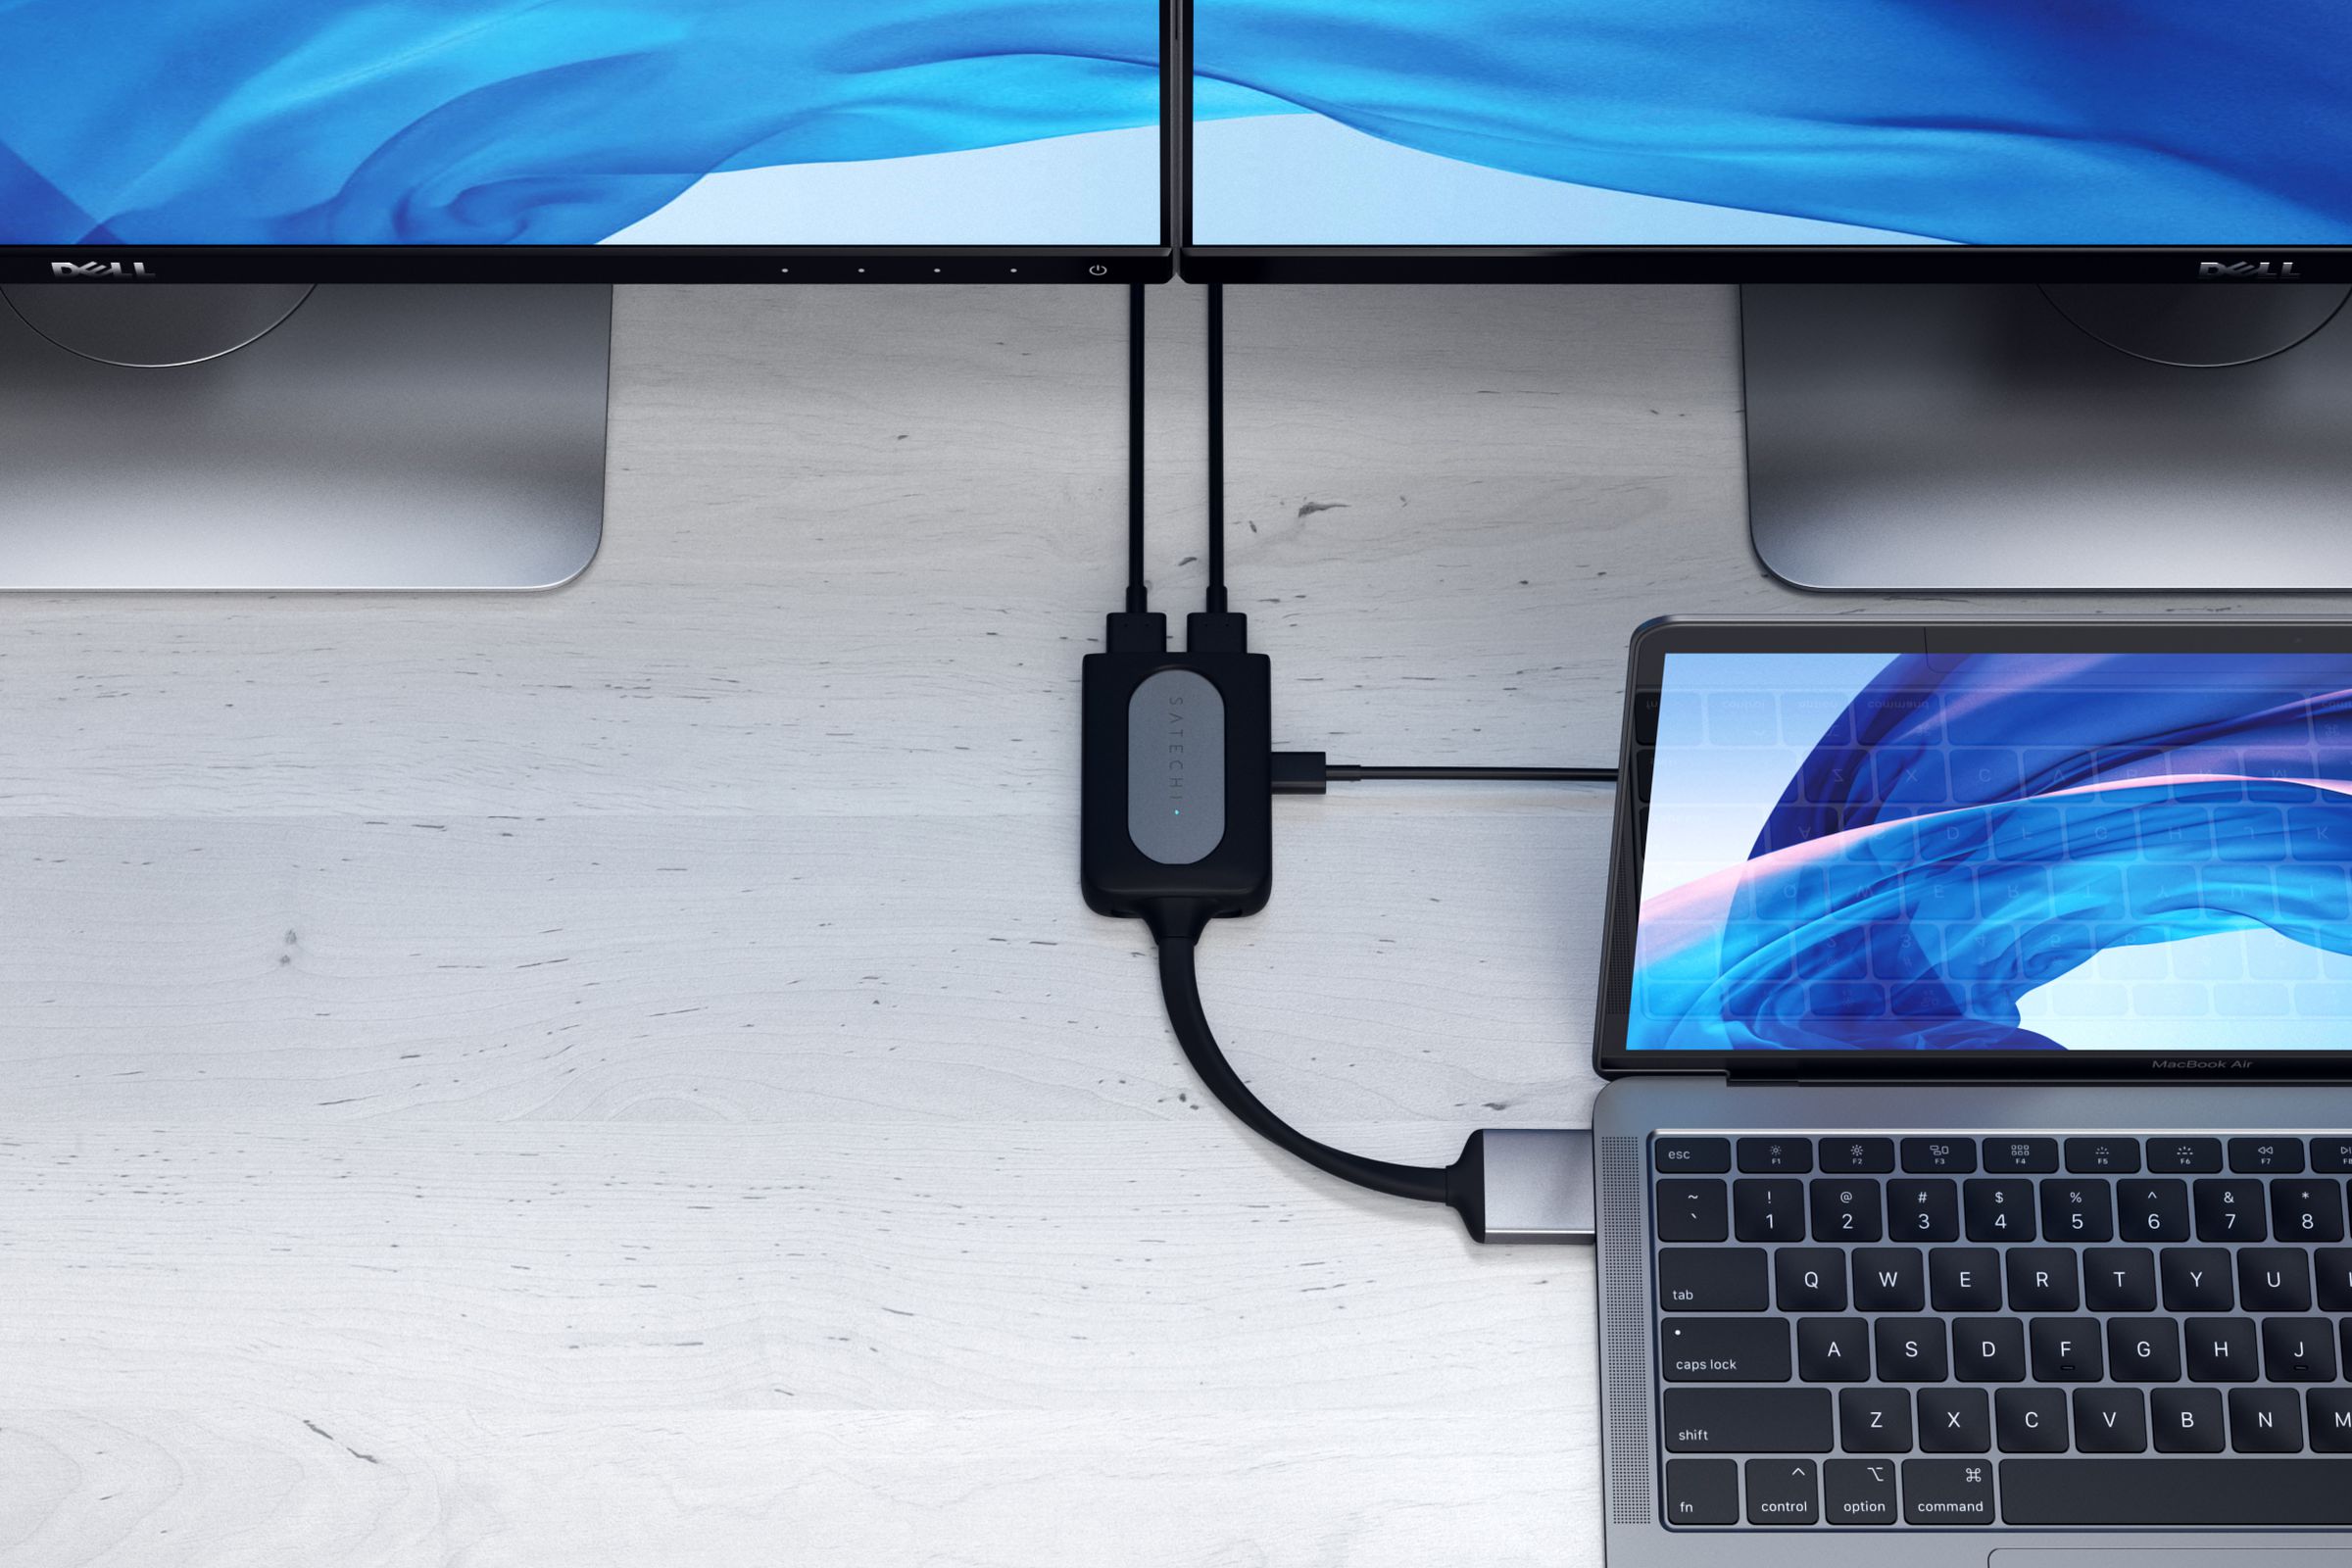 One of Satechi’s newer hubs lets you connect to two 4K 60Hz displays and keep your MacBook Pro charged up.